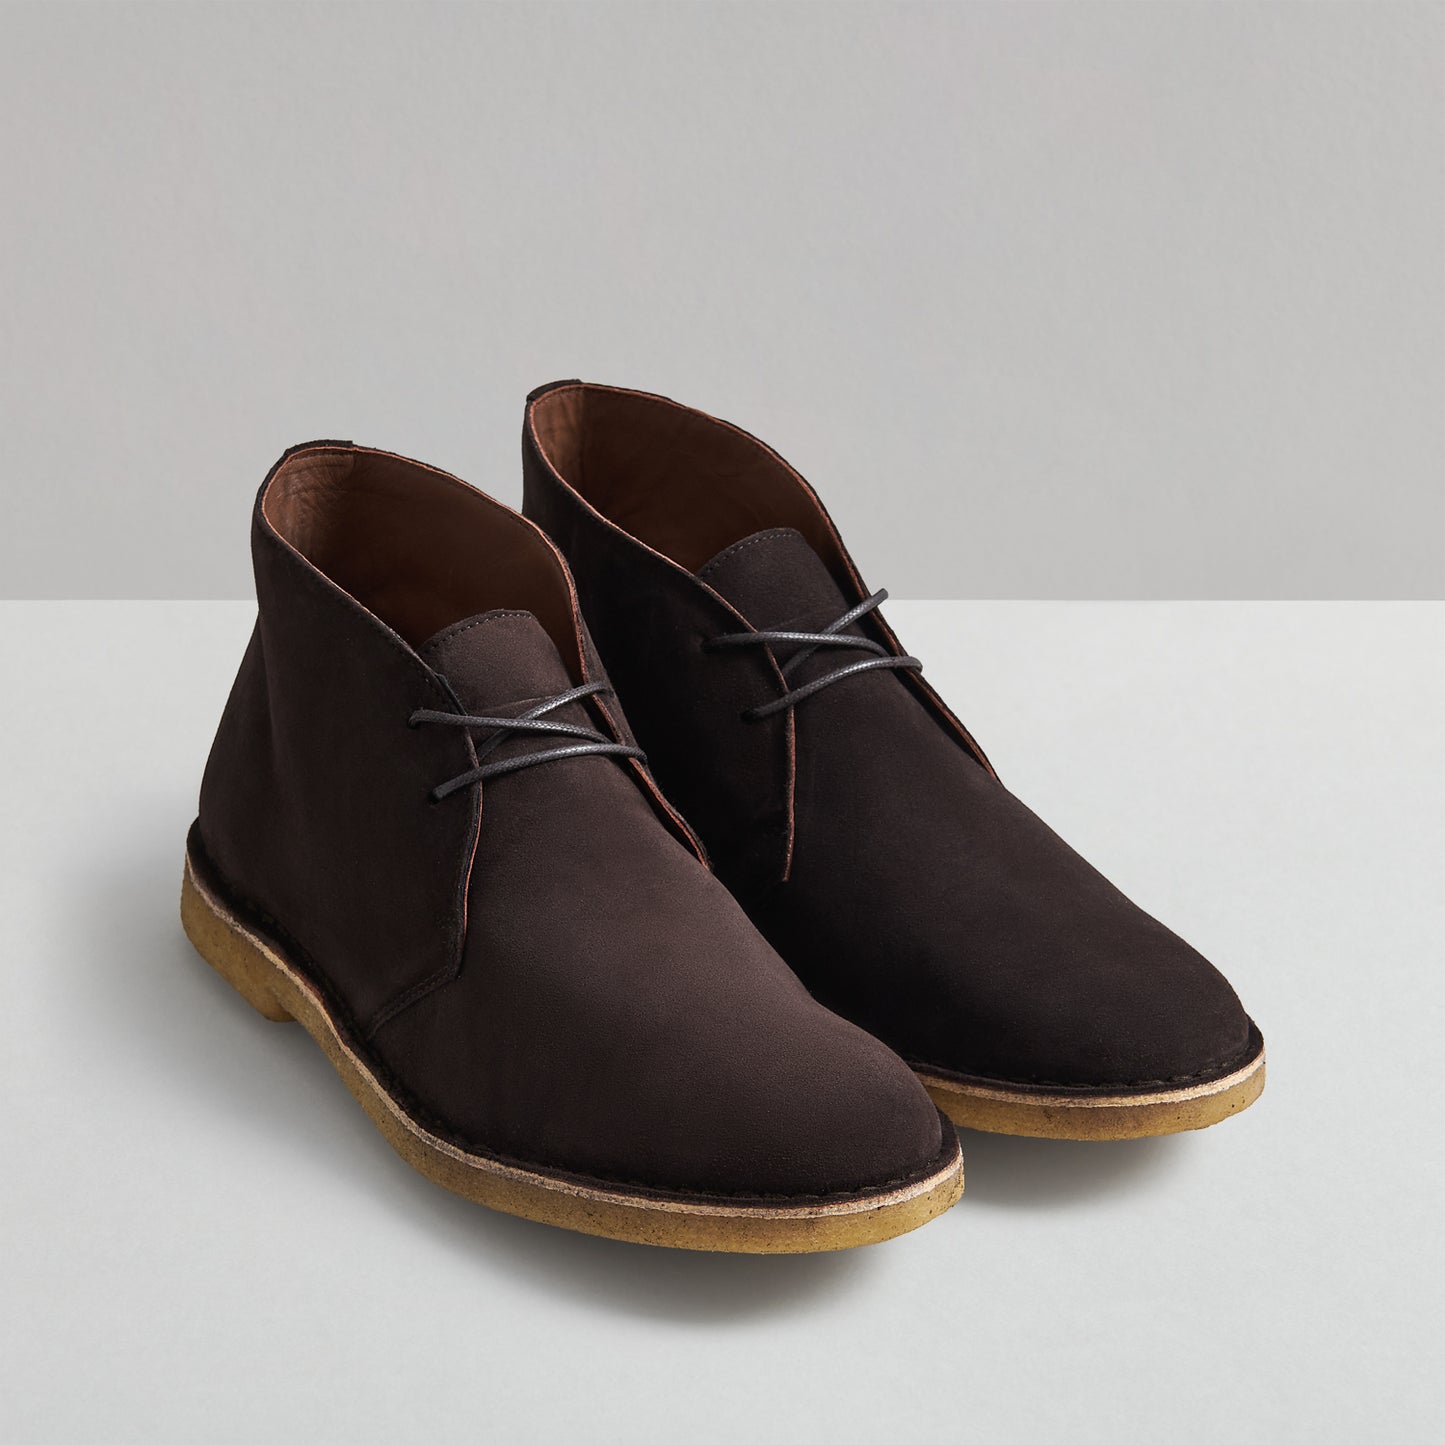 SPENCER BROWN SUEDE BOOT